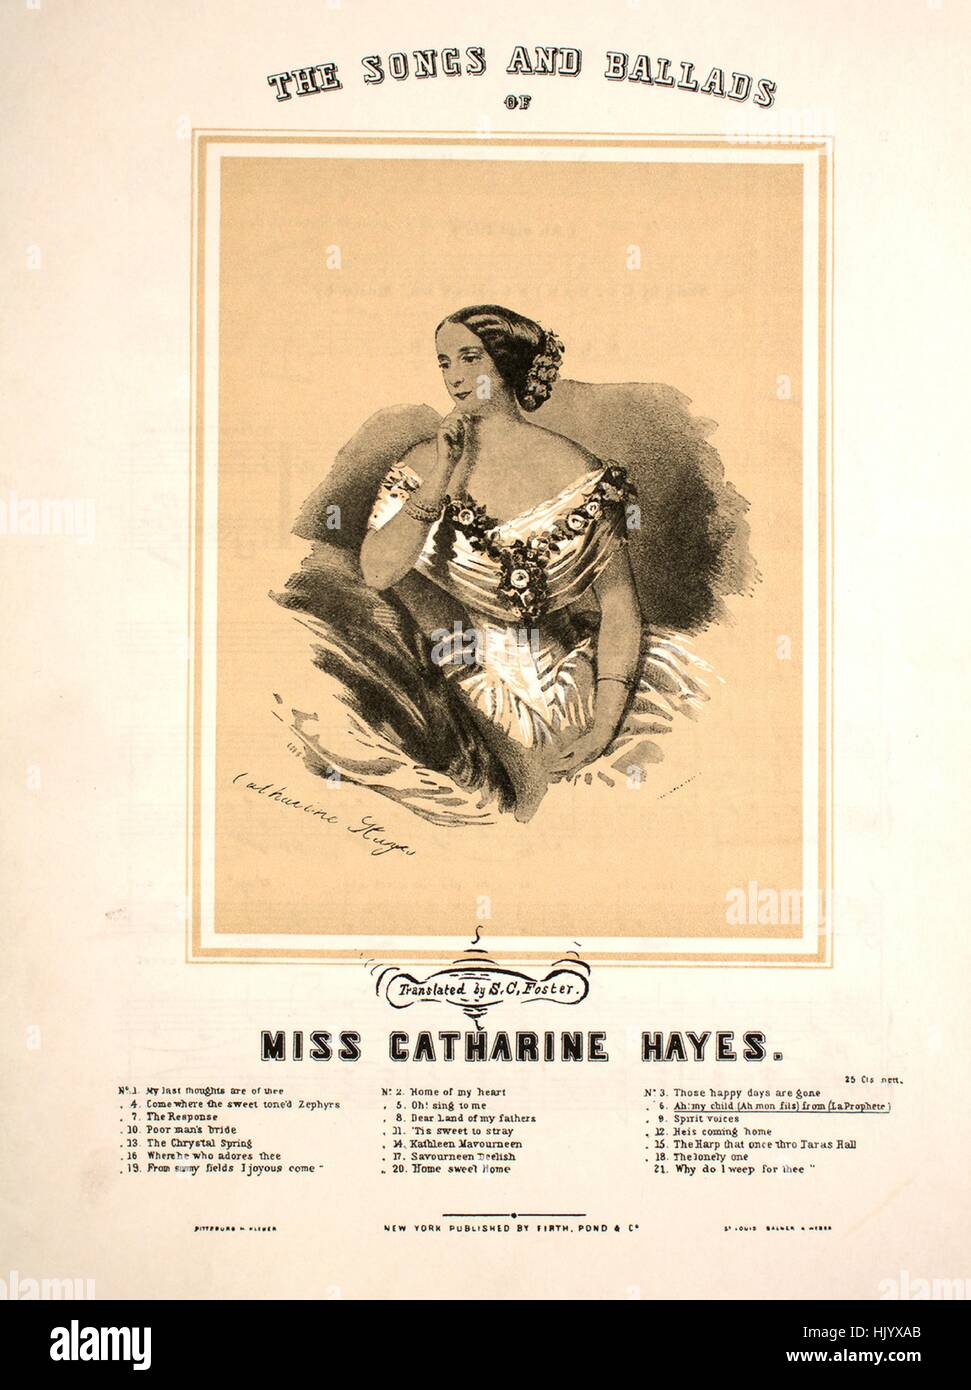 Sheet music cover image of the song '[Foster-Hall Reproductions] The Songs and Ballads of Miss Catharine Hayes No6 Ah! My child (Ah mon fils), from 'La Prophete'', with original authorship notes reading 'Translated by S[tephen] C[ollins] Foster Music by Meyerbeer', United States, 1900. The publisher is listed as 'Firth, Pond and Co.', the form of composition is 'strophic with chorus', the instrumentation is 'piano and voice', the first line reads 'Ah! my child! Ah! my child! For thy poor mother Didst thous then smother all thy sweet dreams', and the illustration artist is listed as 'Quidor E Stock Photo